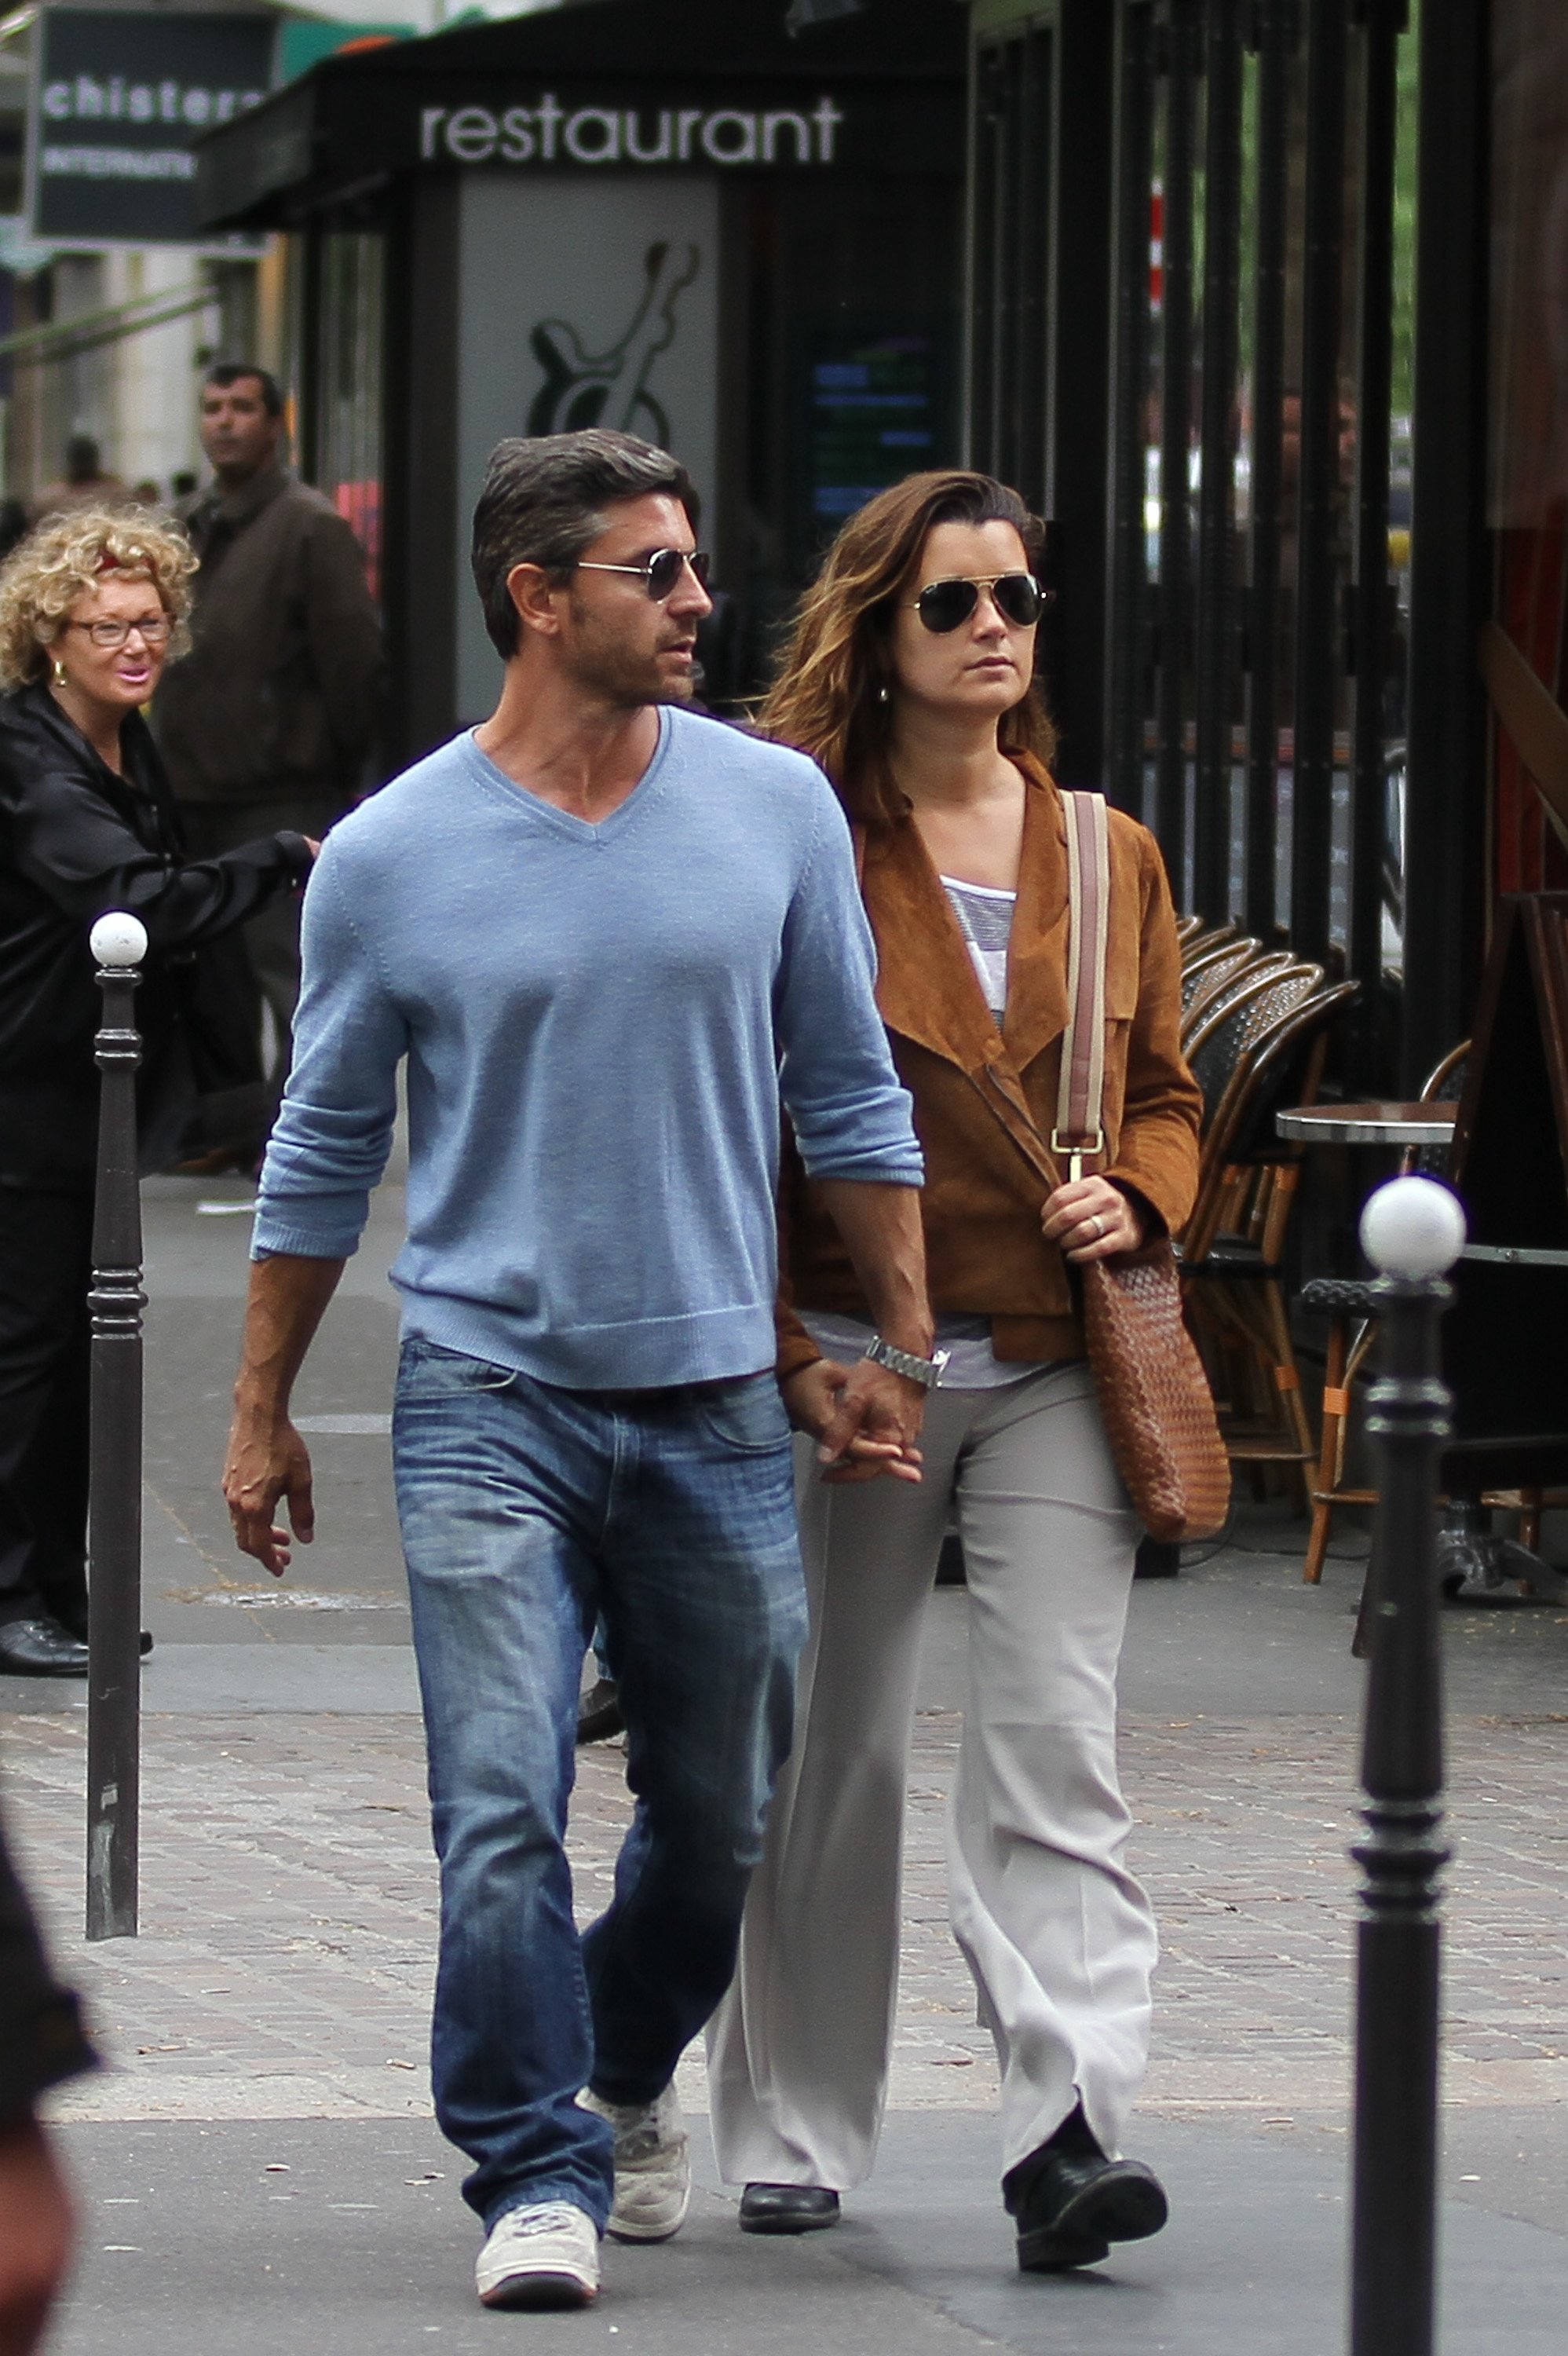 Cote de Pablo and boyfriend Diego Serrano are sighted strolling on 'Rue de Rivoli' on May 9, 2012 | Photo: GettyImages